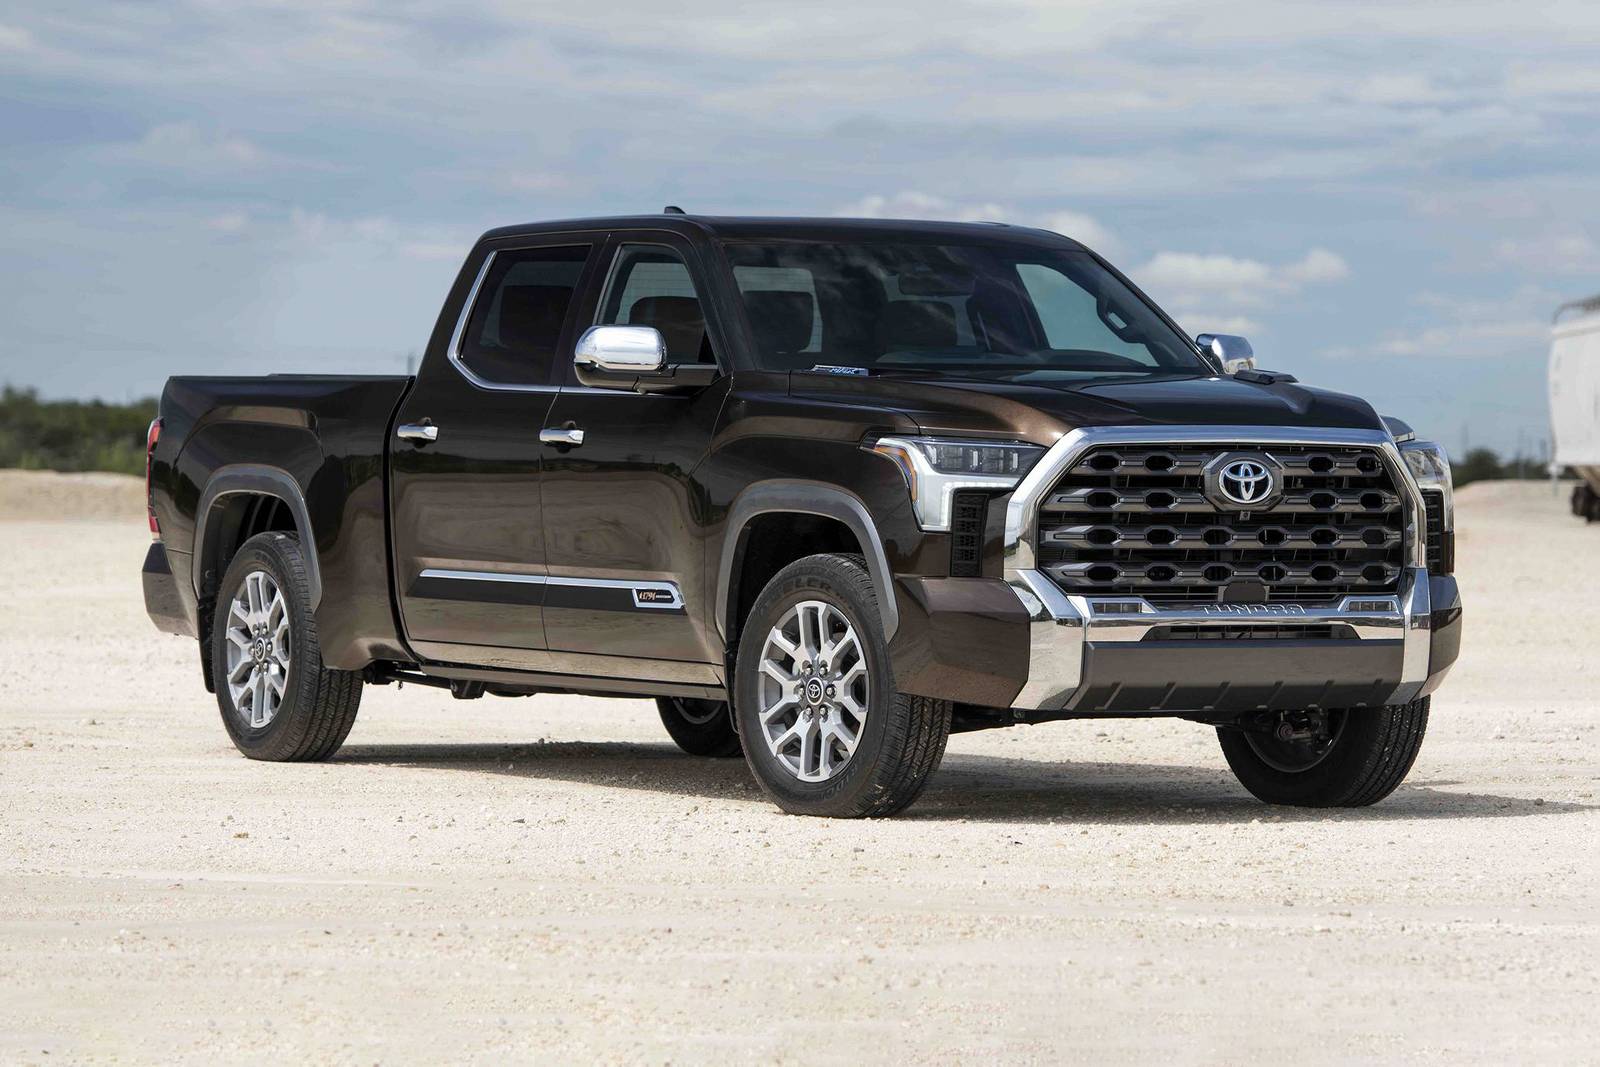 2022 Toyota Tundra - Top 10 Things You Need To Know!